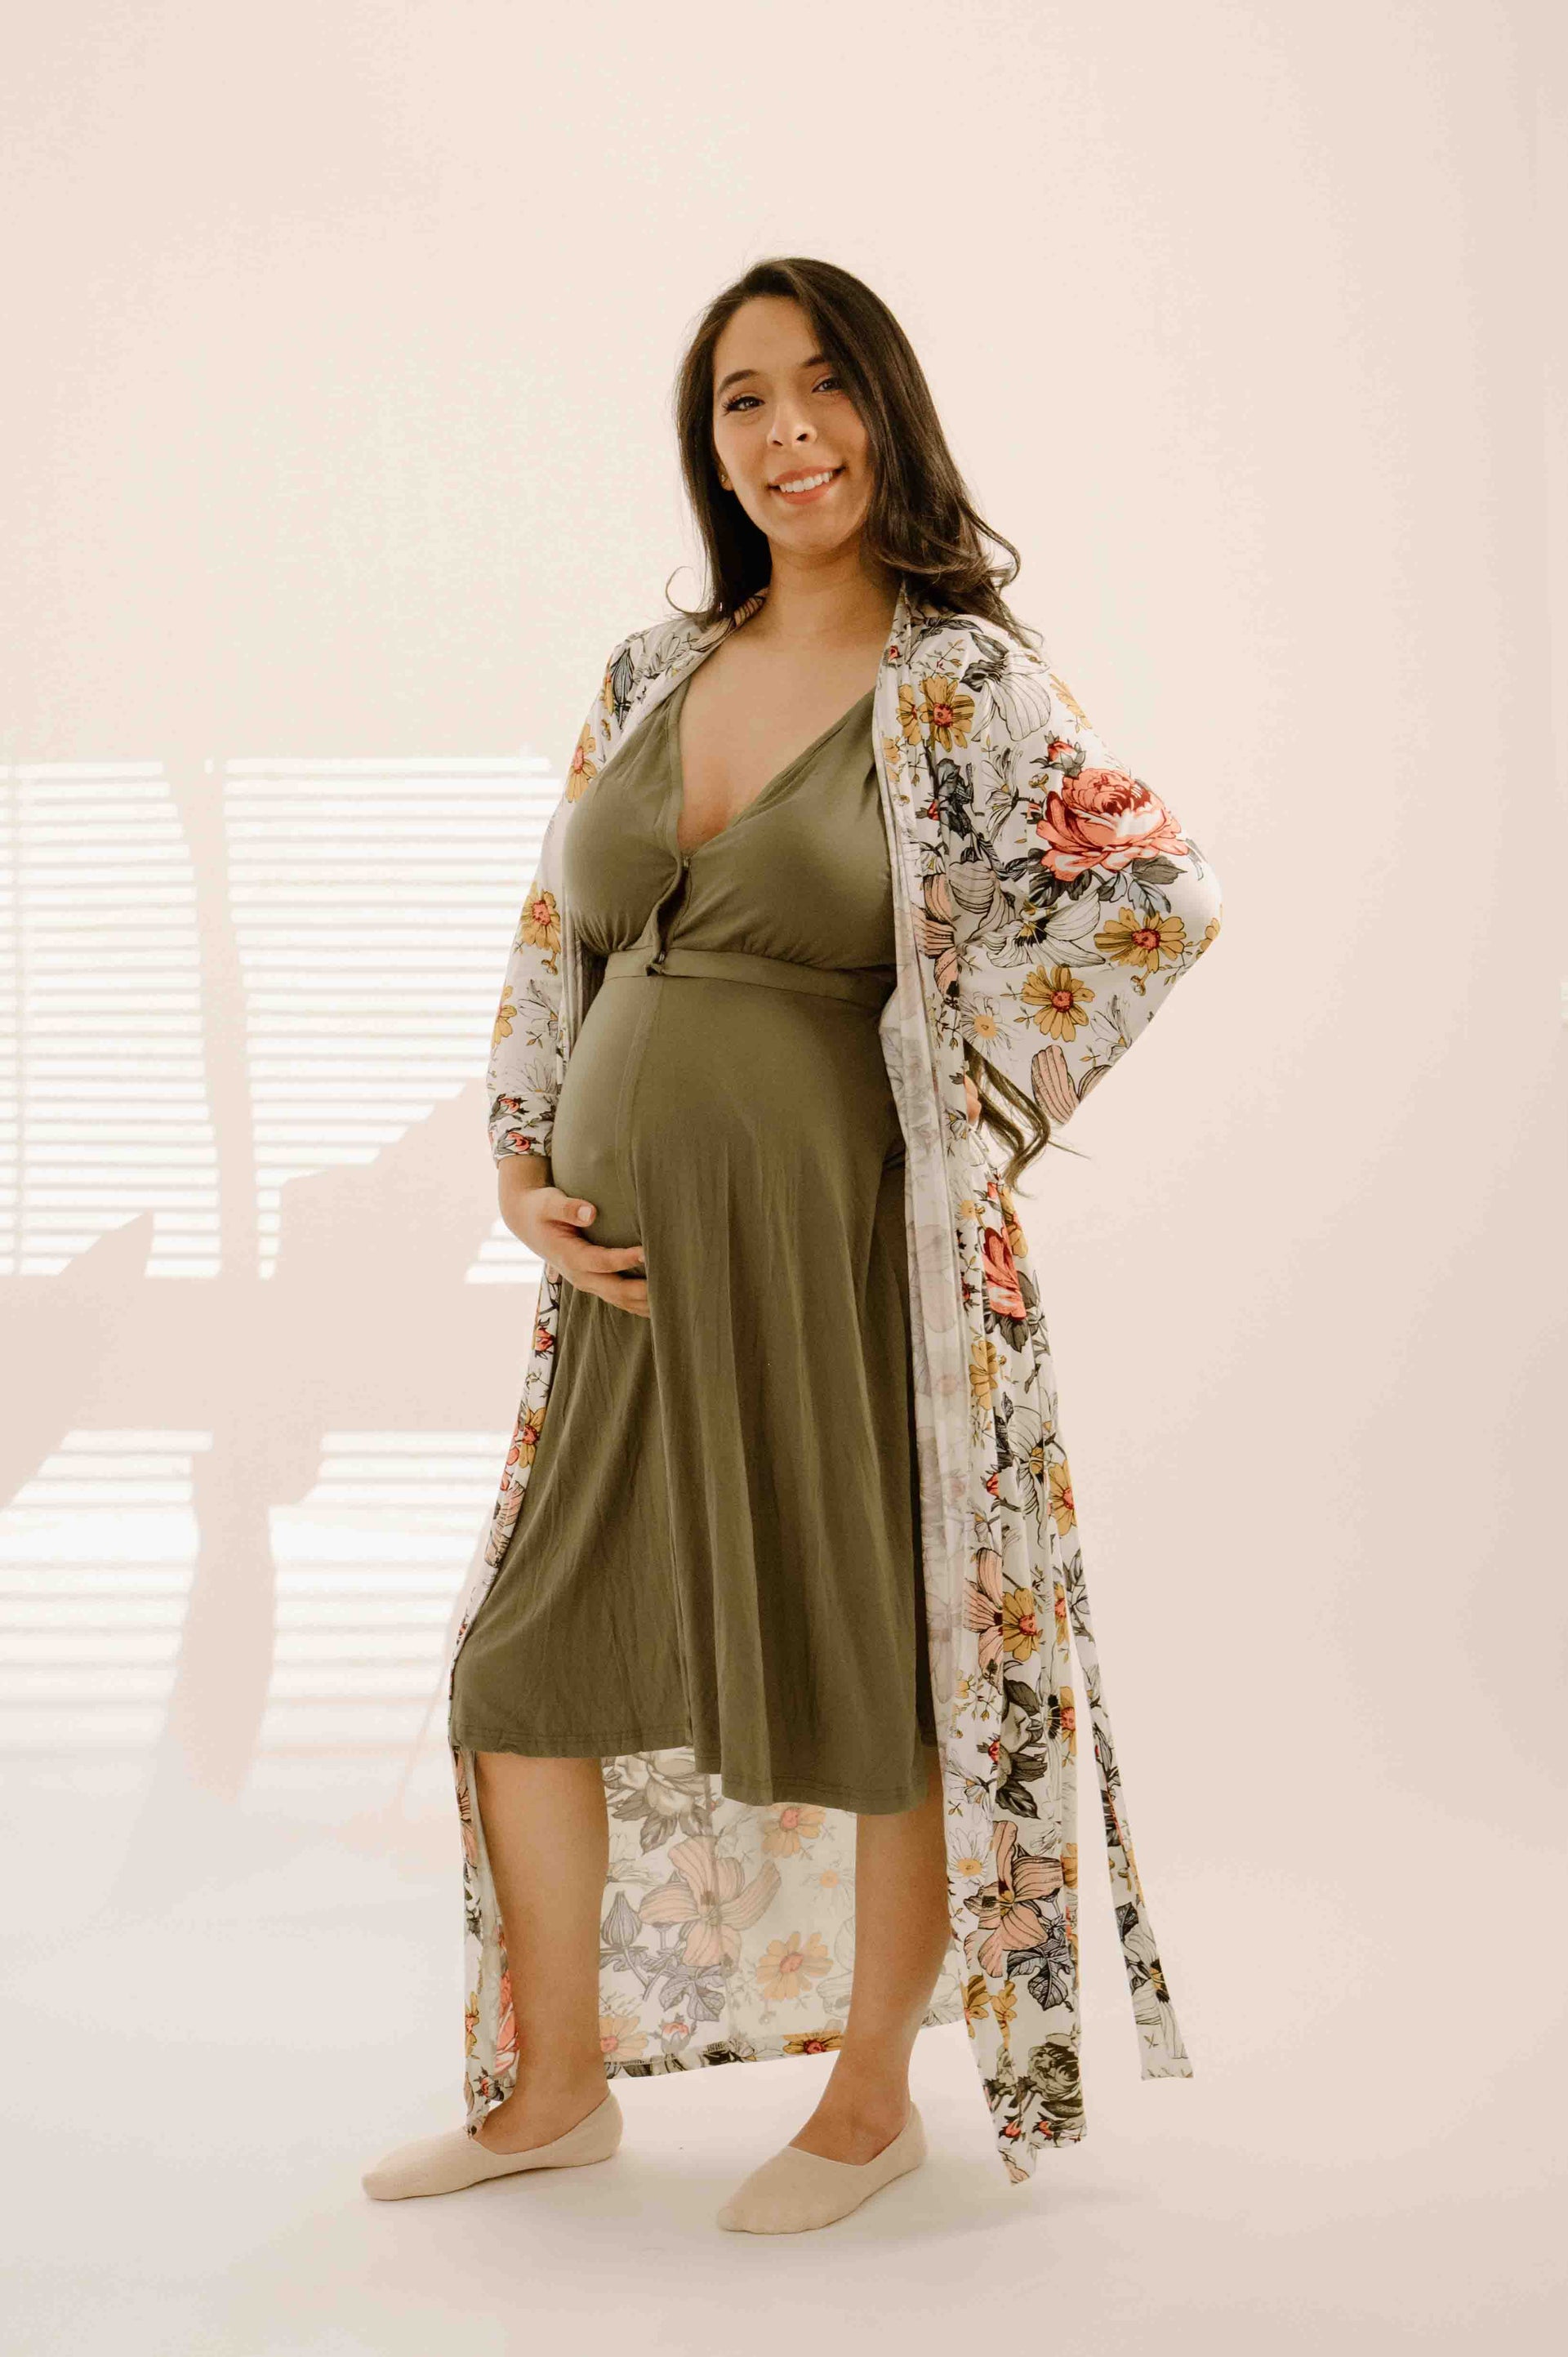 Stylish, comfortable birth gowns, bump-friendly maternity clothes